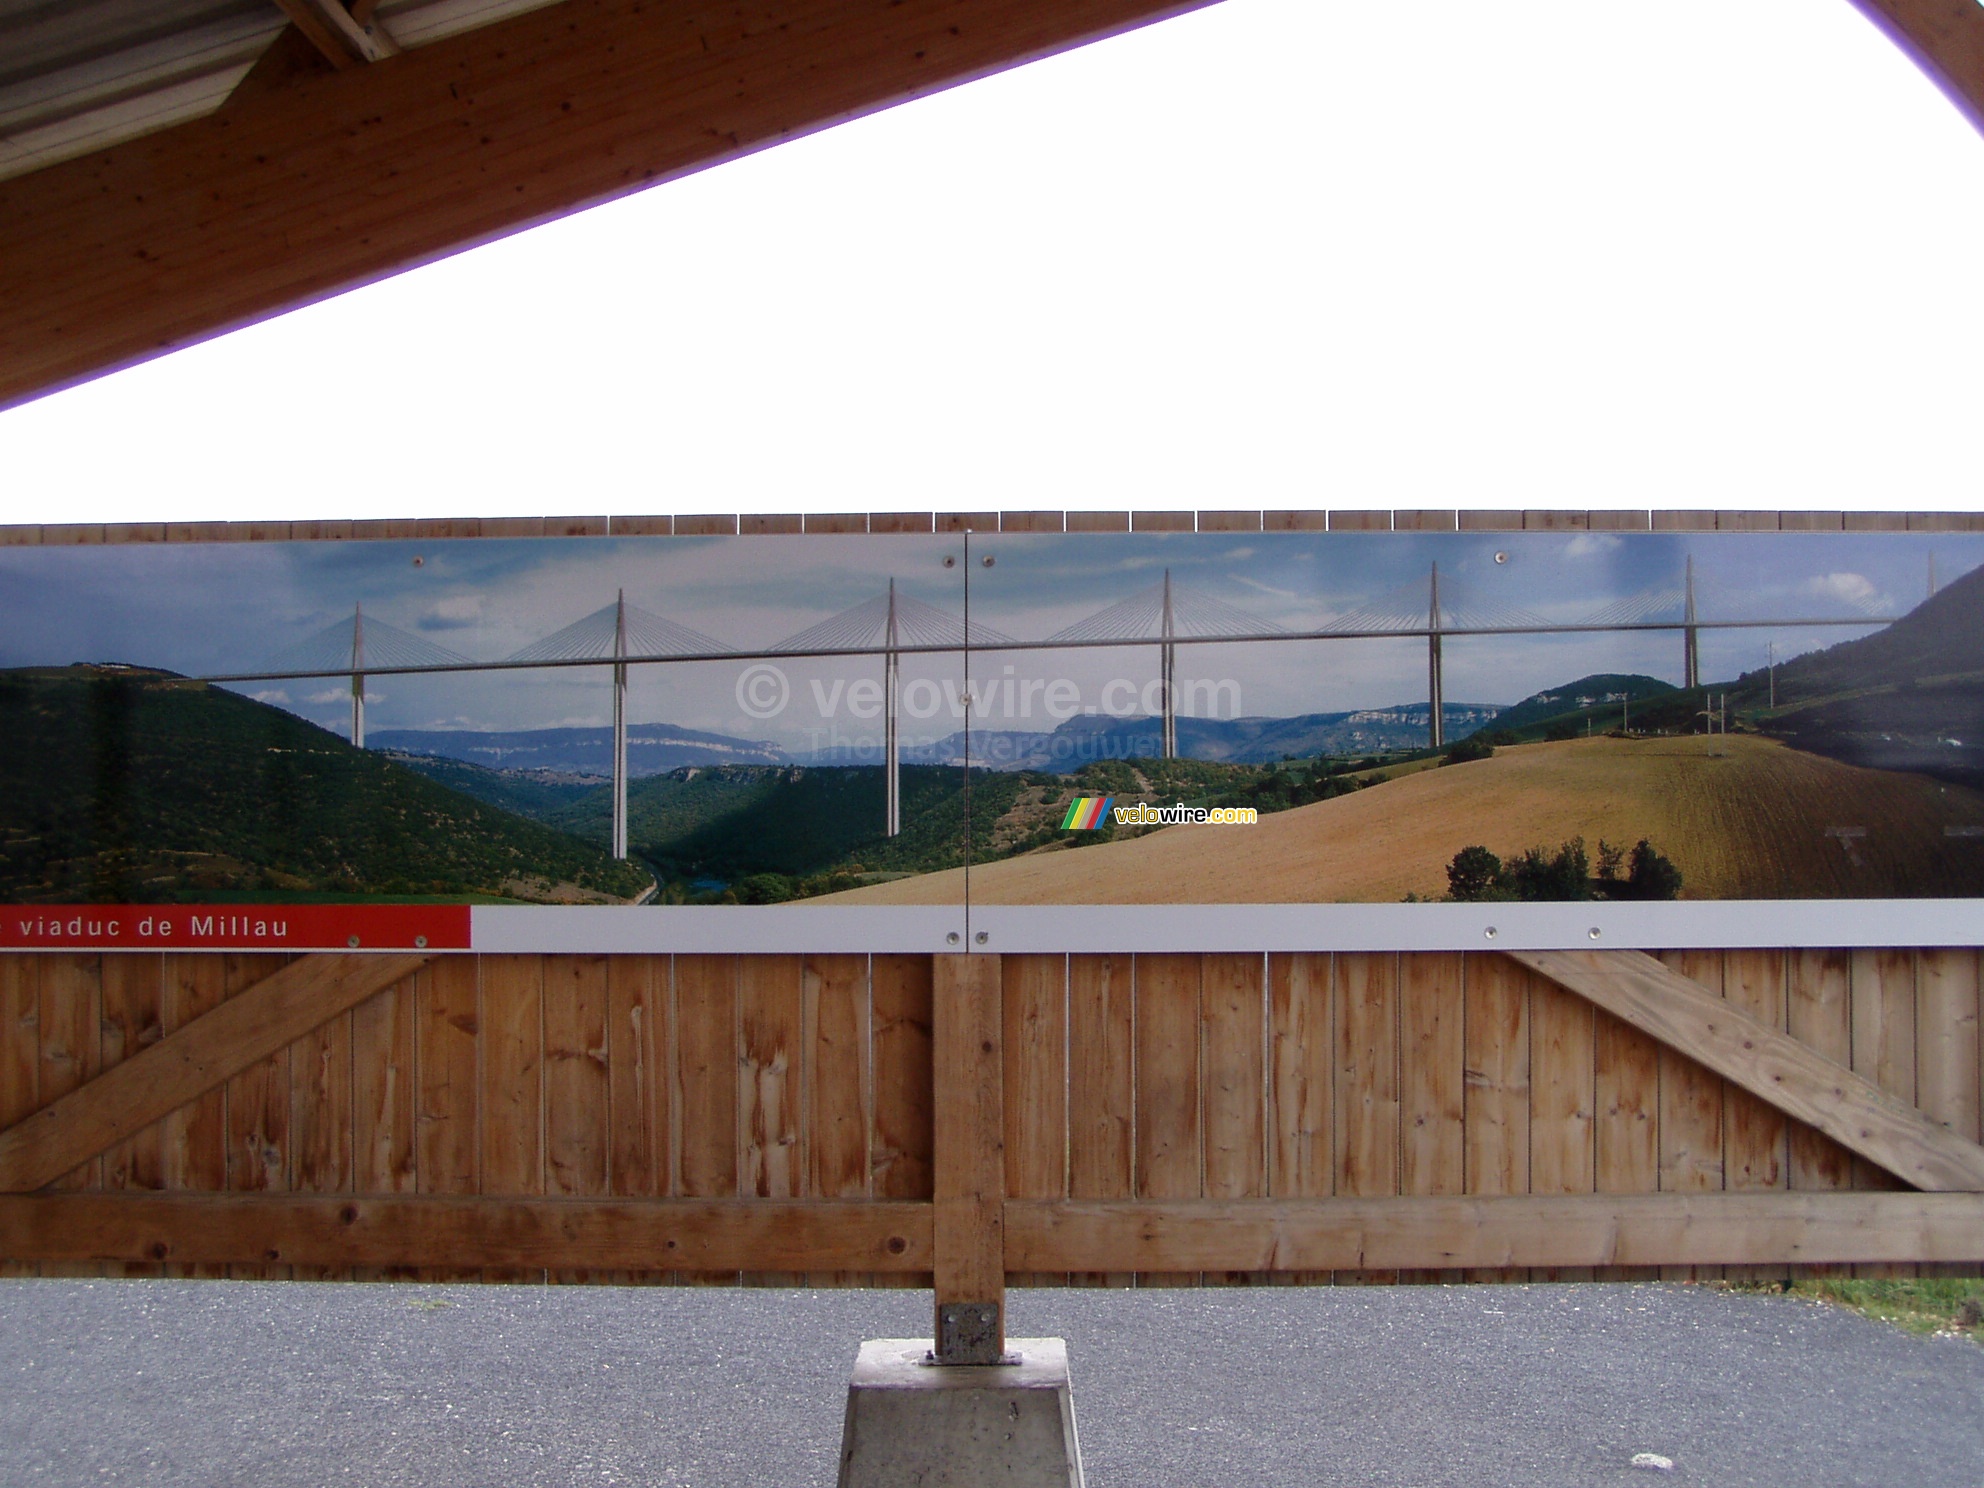 A picture of the viaduct of Millau